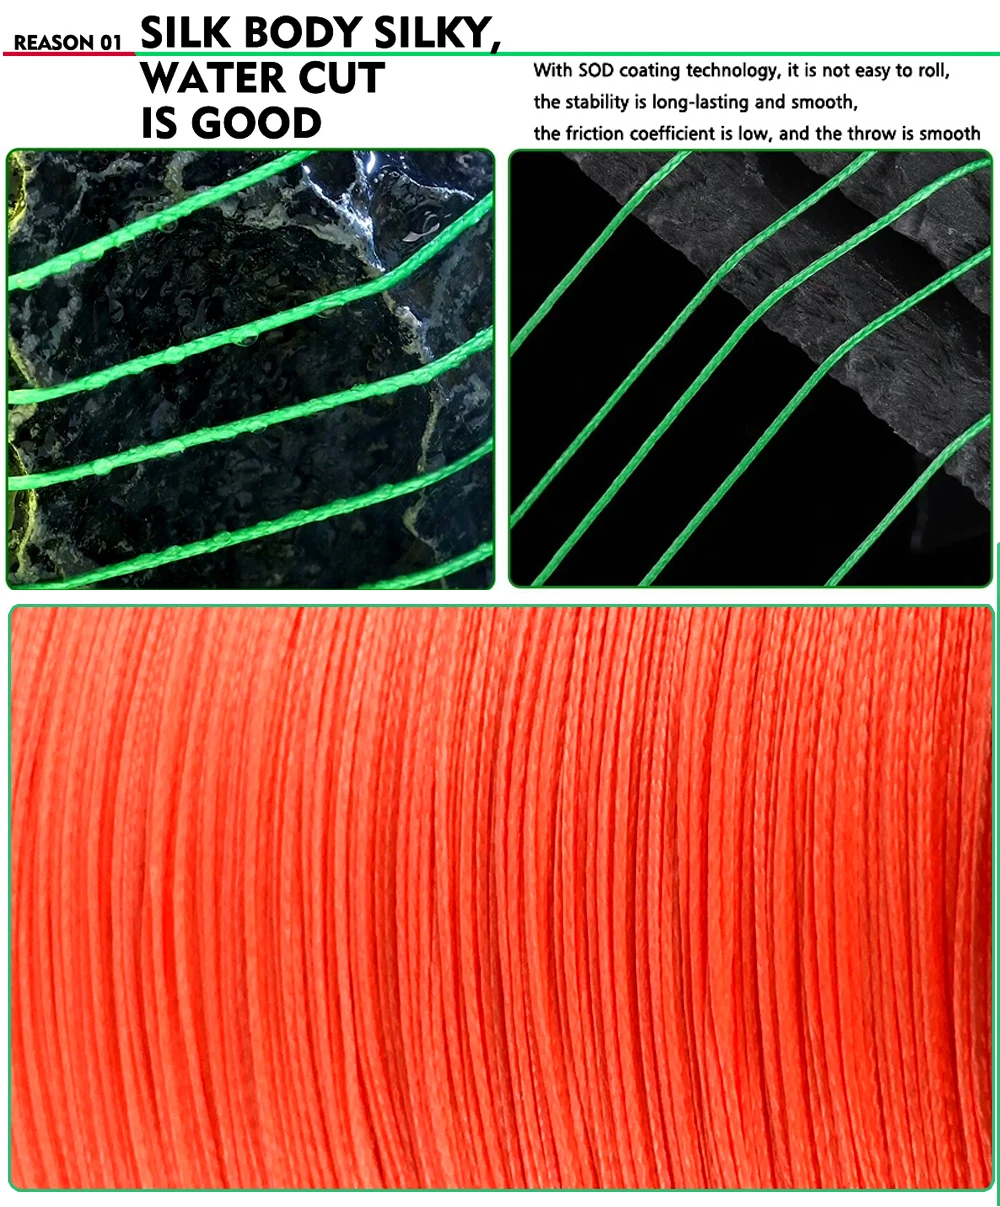 PE Braided Wire 8/4 Strands Multifilament Japanese Fishing Line